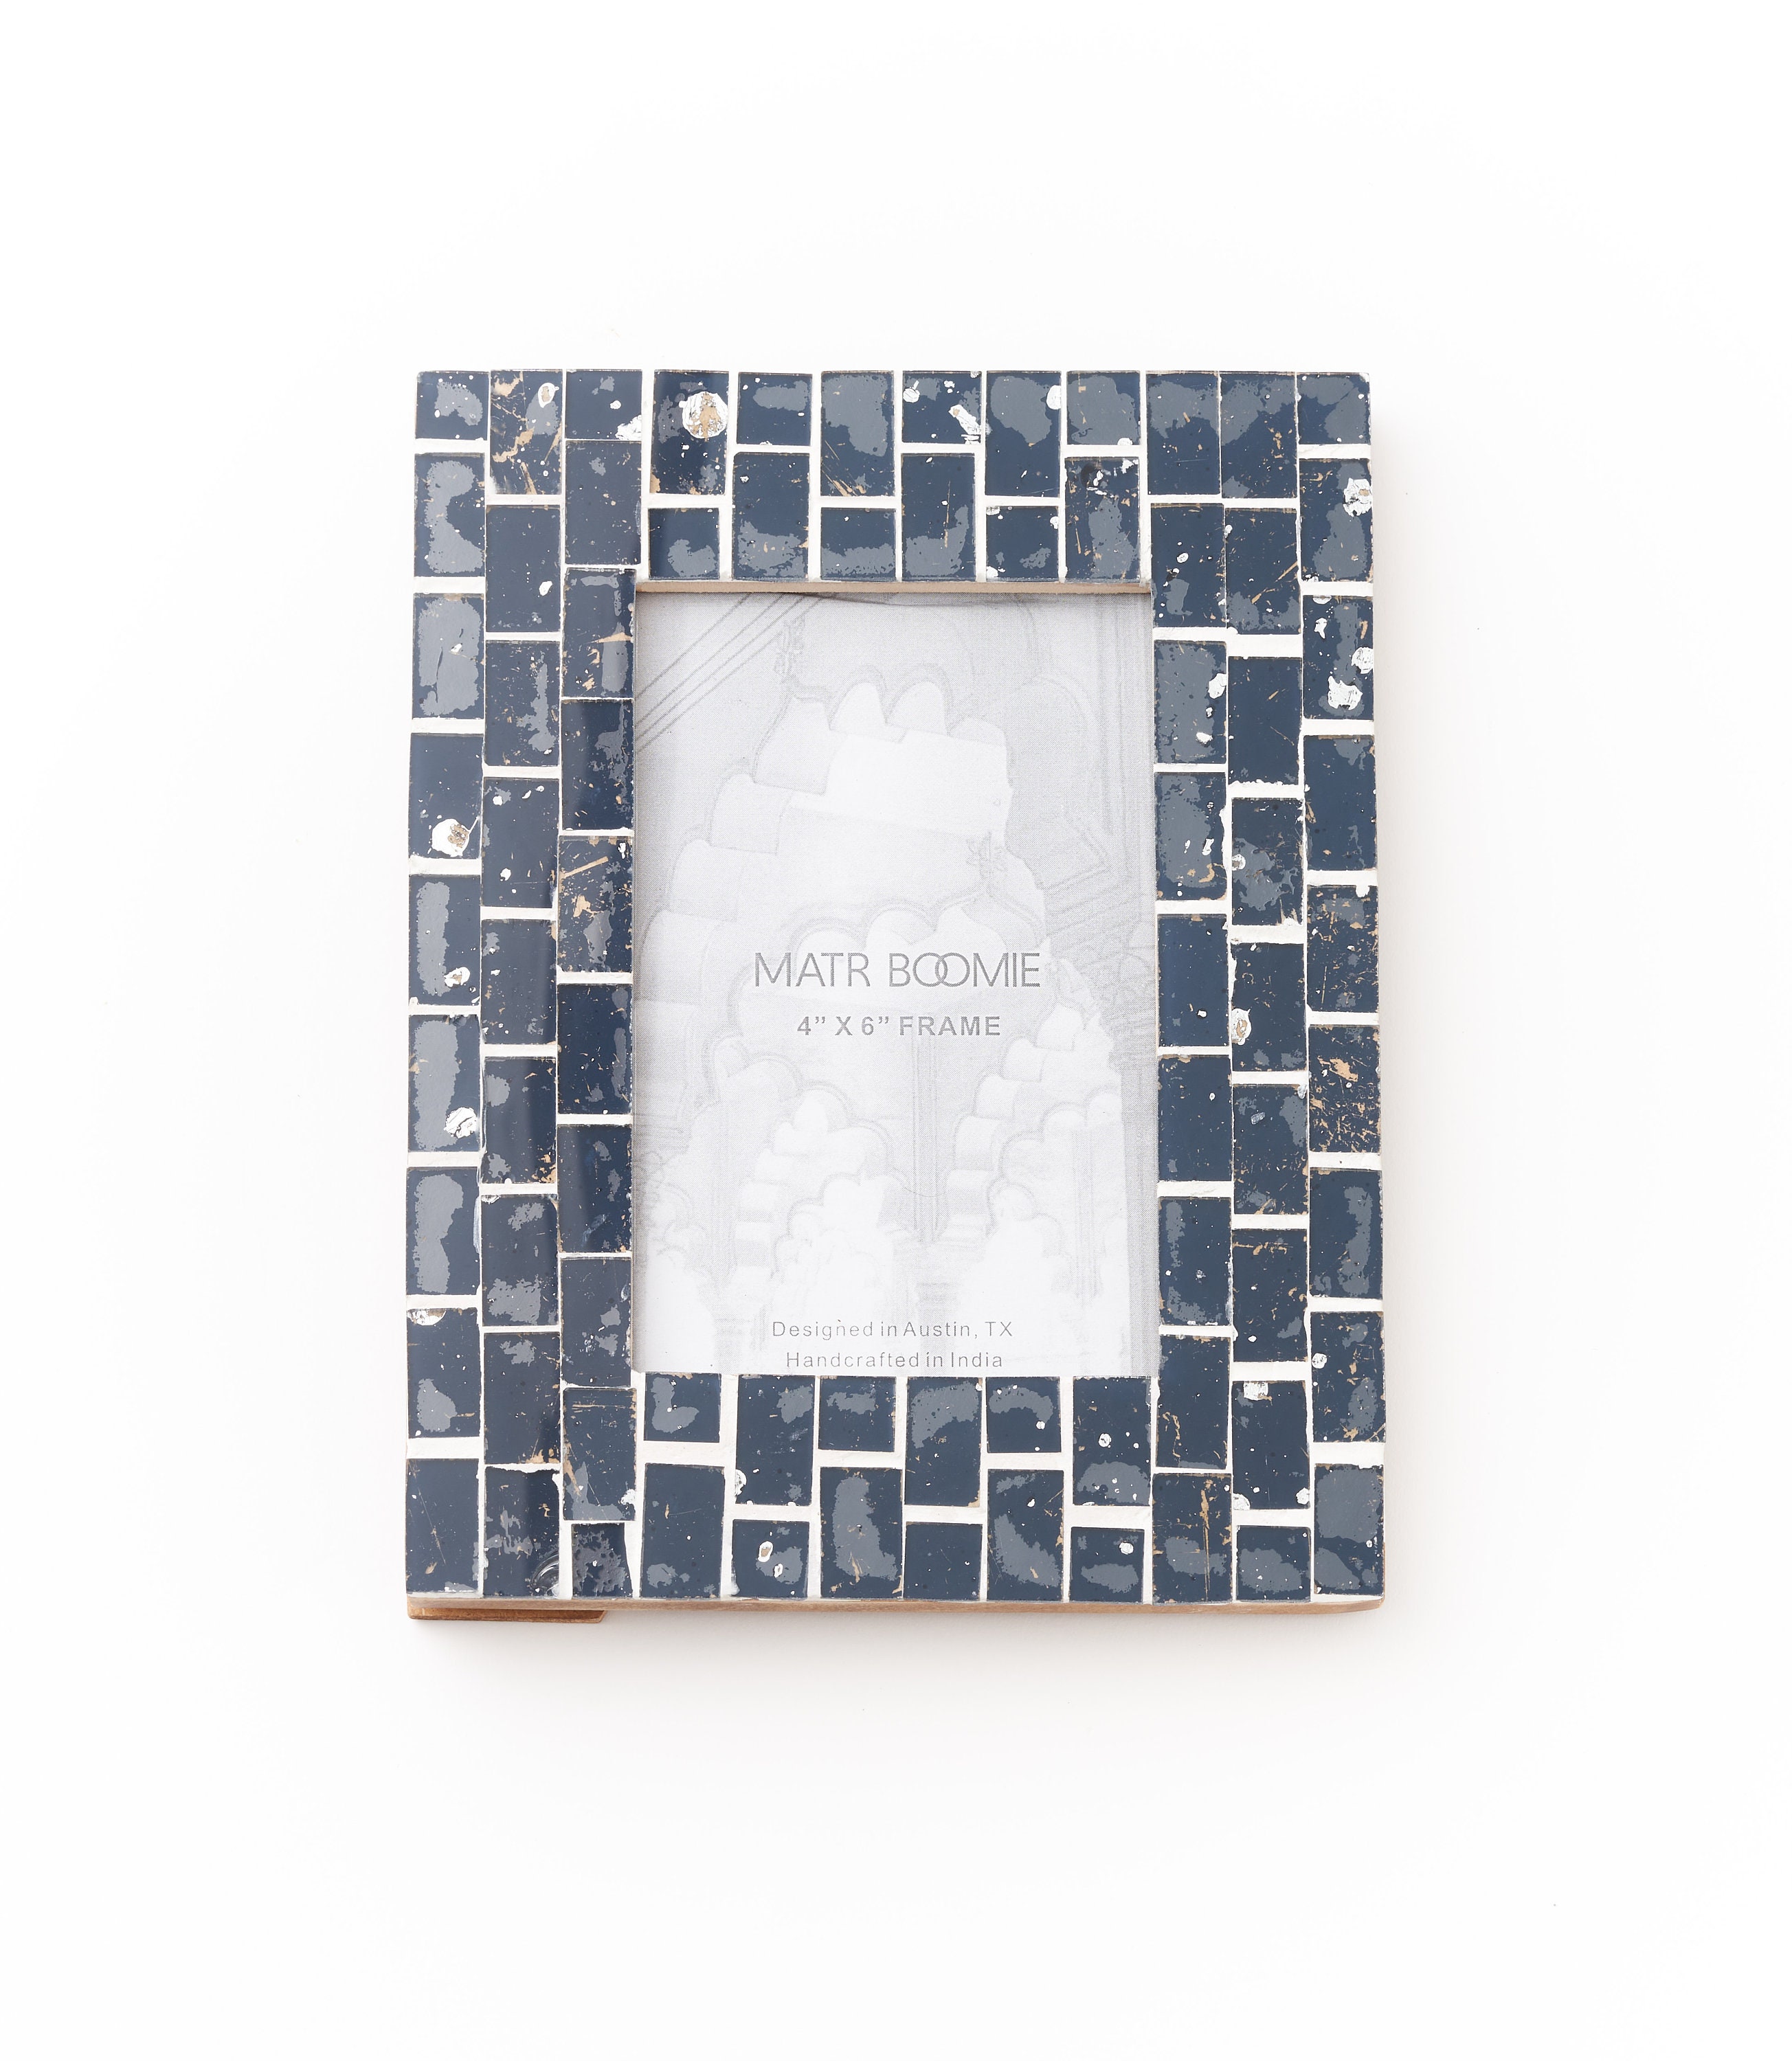 Ss Rectangle Picture Frames SUBLIMATION BLANKS 3x5 4x6 5x7 8x10 10x12 11x14  16x20 Photo Frame Tile Plaque Unisub Mdf Hard Board Diy Mdf 